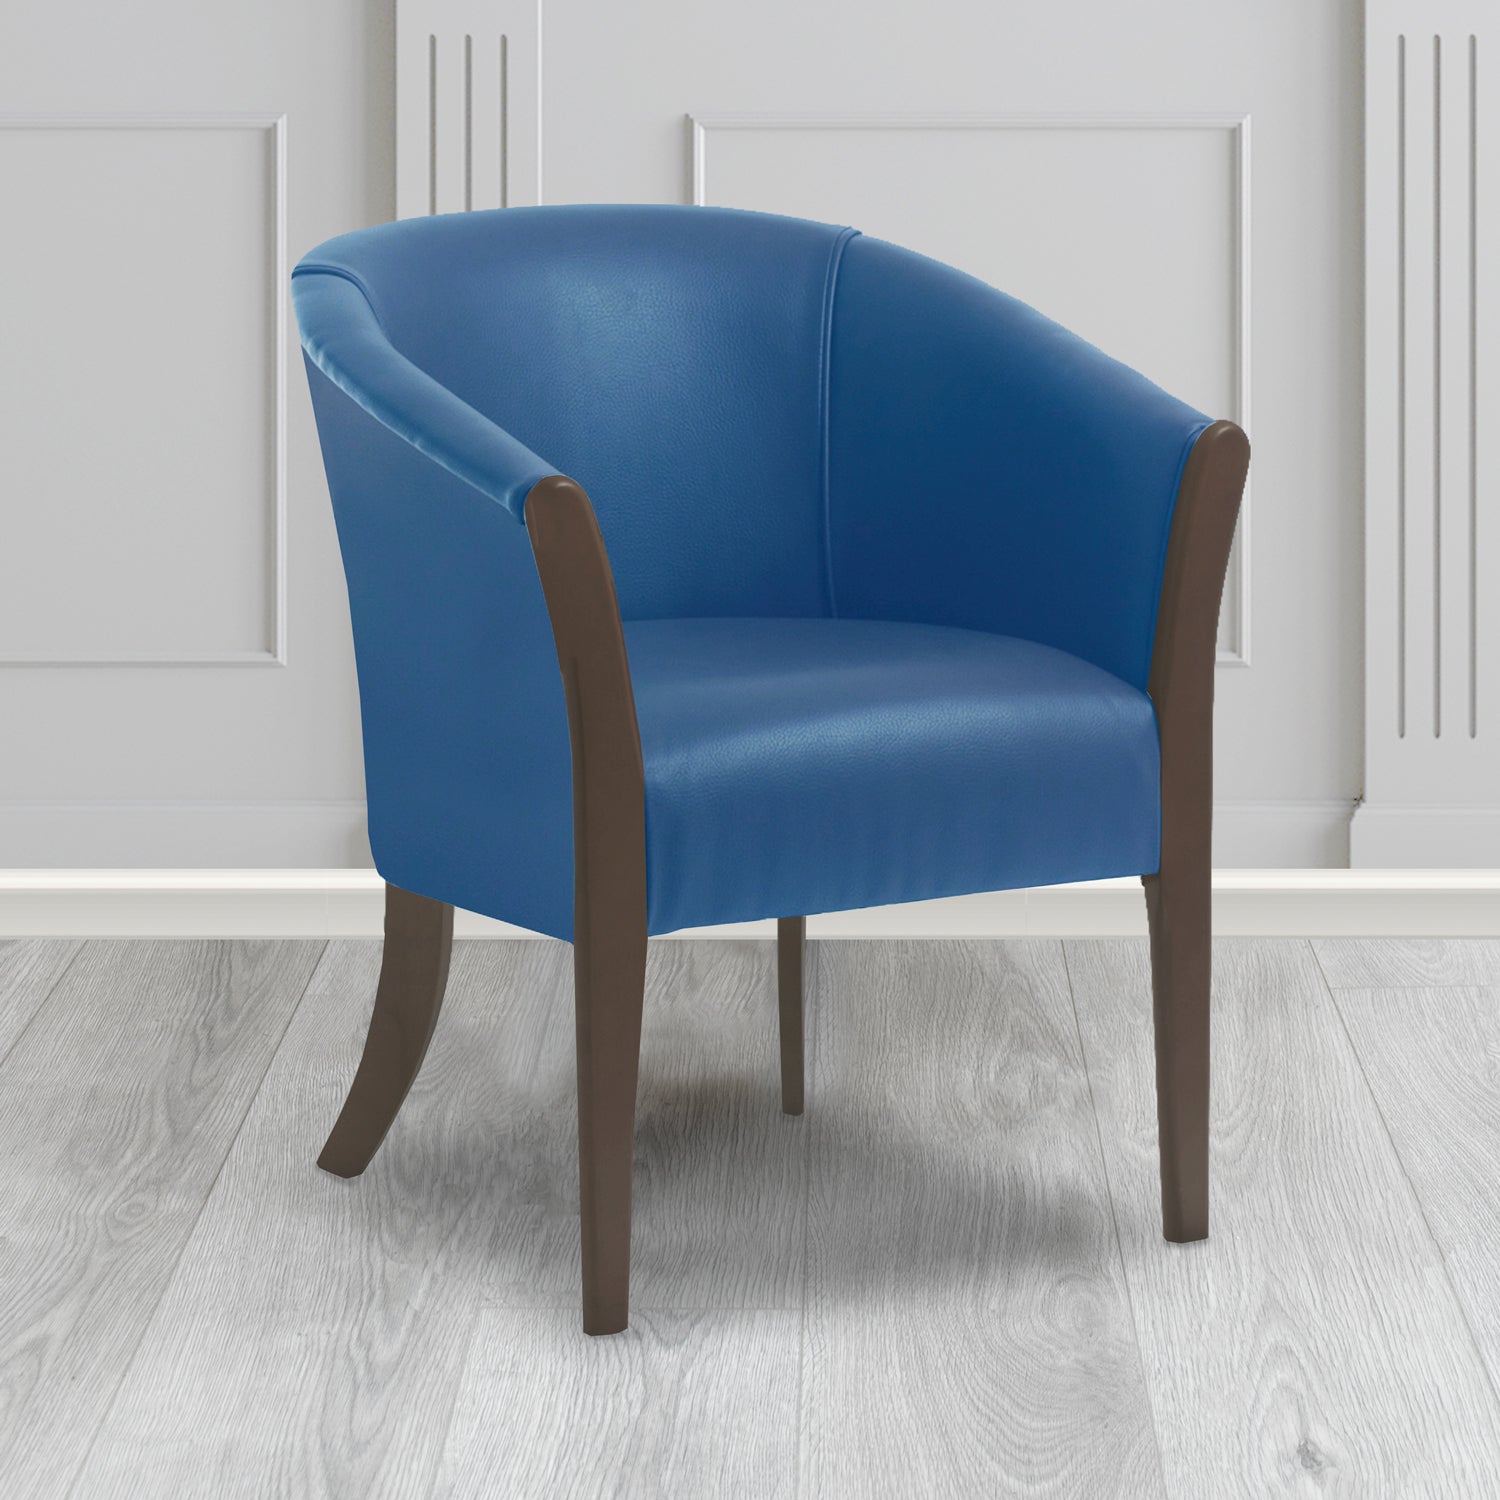 Hamilton Tub Chair in Agua Paint Pot Blue Crib 5 Faux Leather - Antimicrobial, Stain Resistant & Waterproof - The Tub Chair Shop